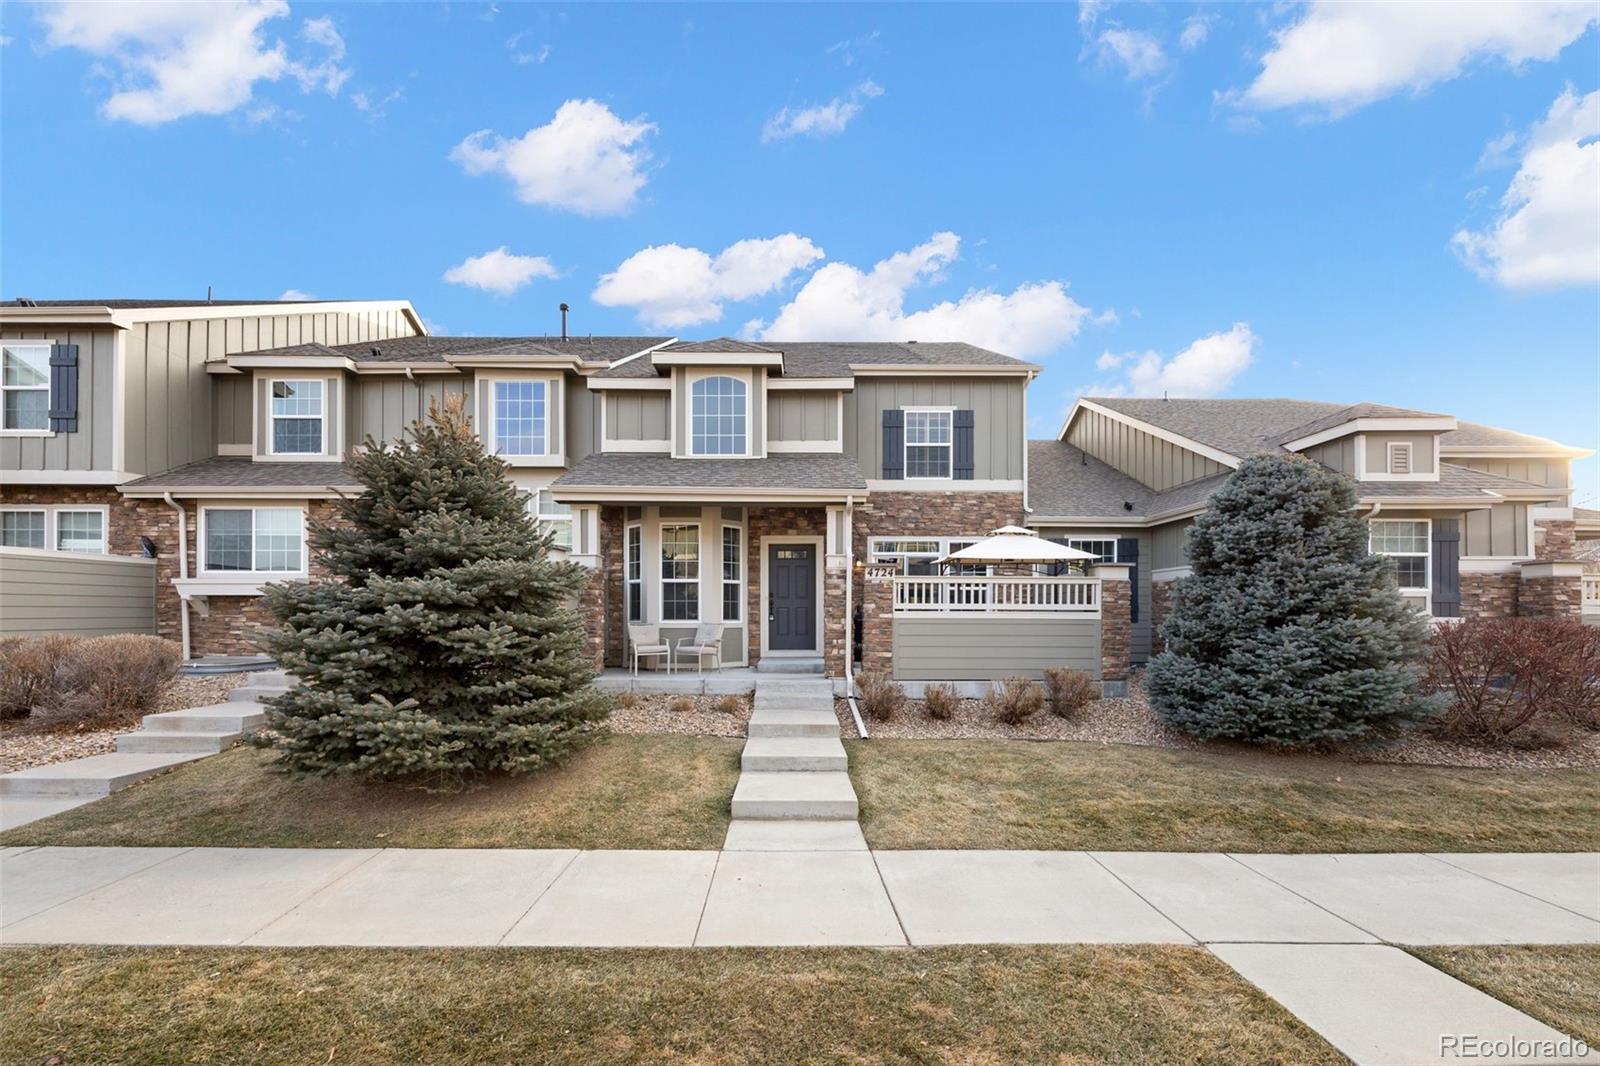 4724  raven run, broomfield sold home. Closed on 2024-04-26 for $585,000.